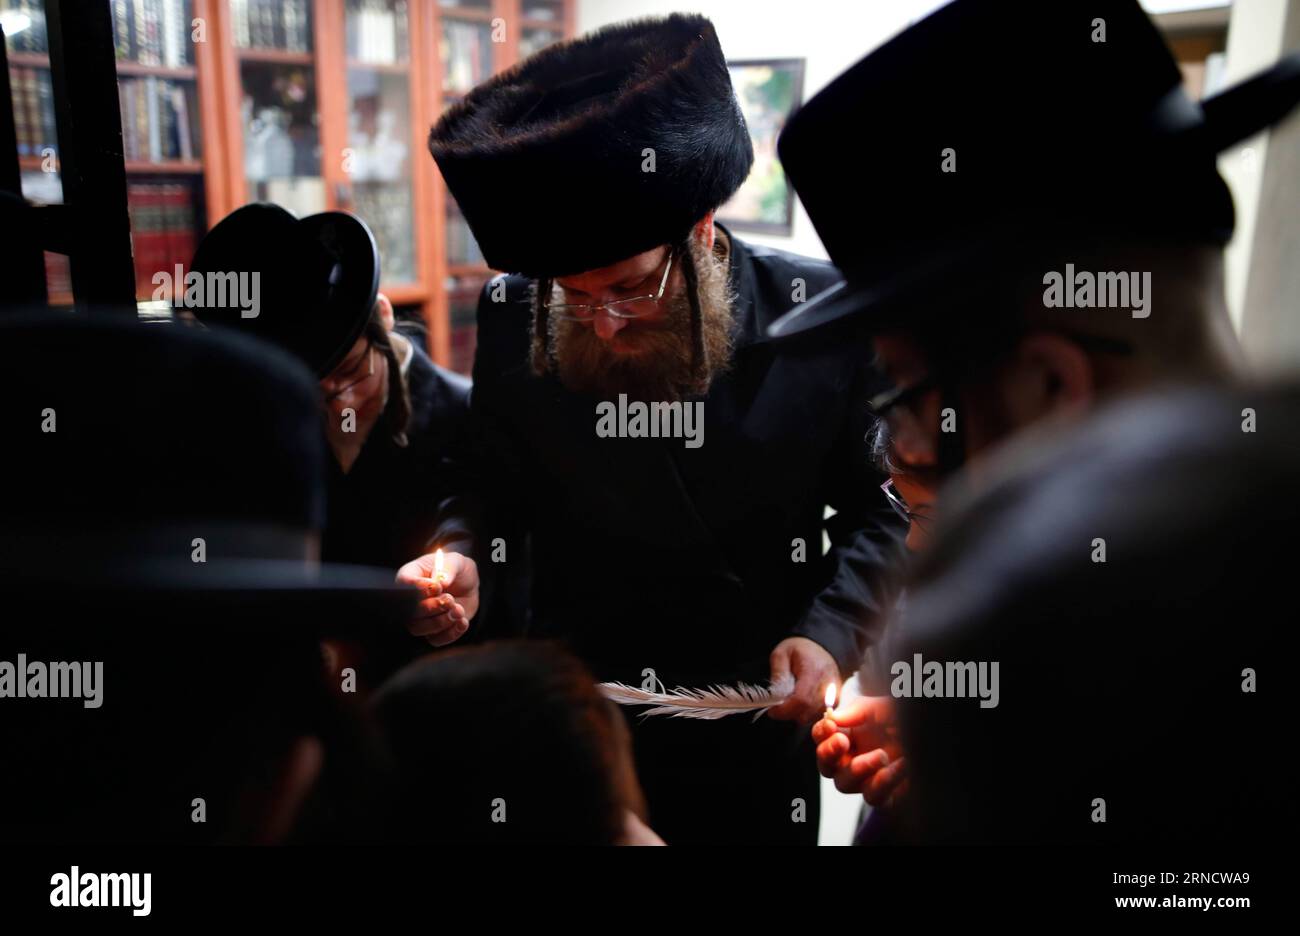 Vorbereitungen für Passah-Fest in Jerusalem, Israel (160422) -- TEL AVIV, April 22, 2016 -- An Ultra-orthodox Jewish family pray as they use a candle to search for the remains of bread in preparation for the upcoming Jewish holiday of Passover in Rehovot, south of Tel Aviv, Israel on April 21, 2016. Passover, which will be marked on April 22, 2016, commemorates the story of the Exodus as described in the Hebrew Bible especially in the Book of Exodus, in which the Israelites were freed from slavery in Egypt. ) ISRAEL-TEL AVIV-PASSOVER GilxCohenxMagen PUBLICATIONxNOTxINxCHN   Preparations for Pa Stock Photo